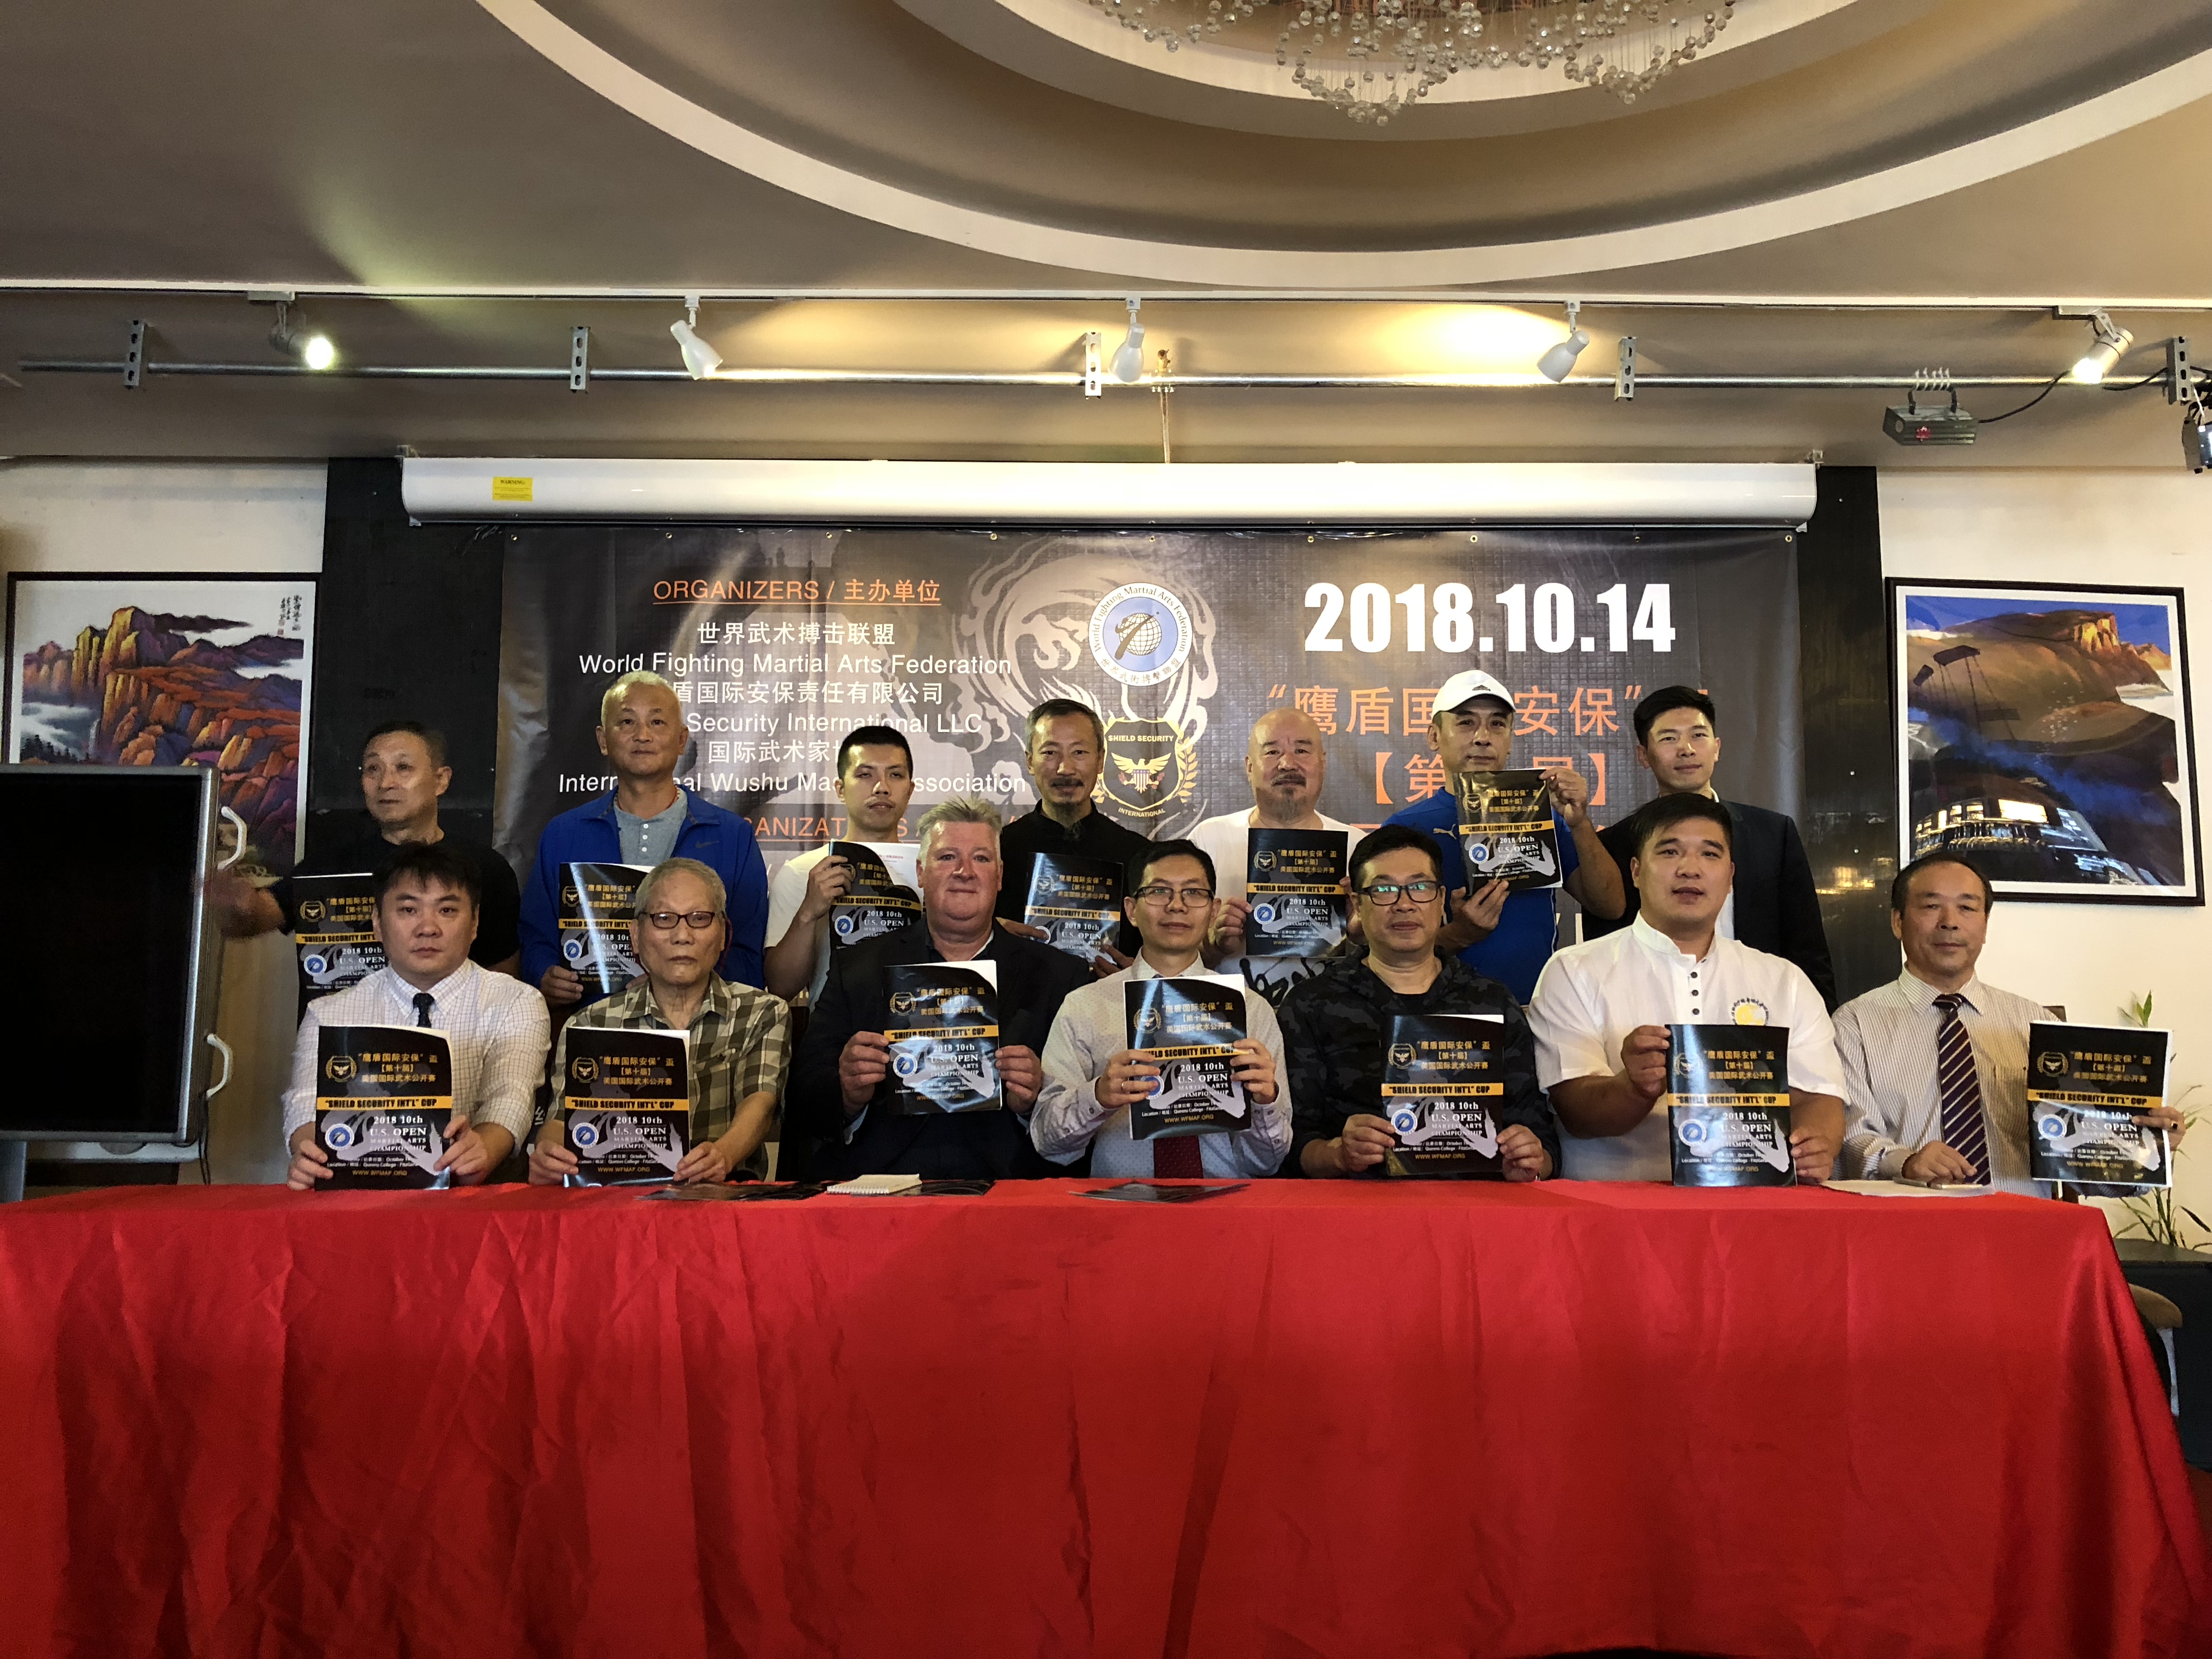 Press conference for the 2018 "Shield Security International" Cup 10th Annuanl US Open Martial Arts Championship, October 4 at New York Meeting Club